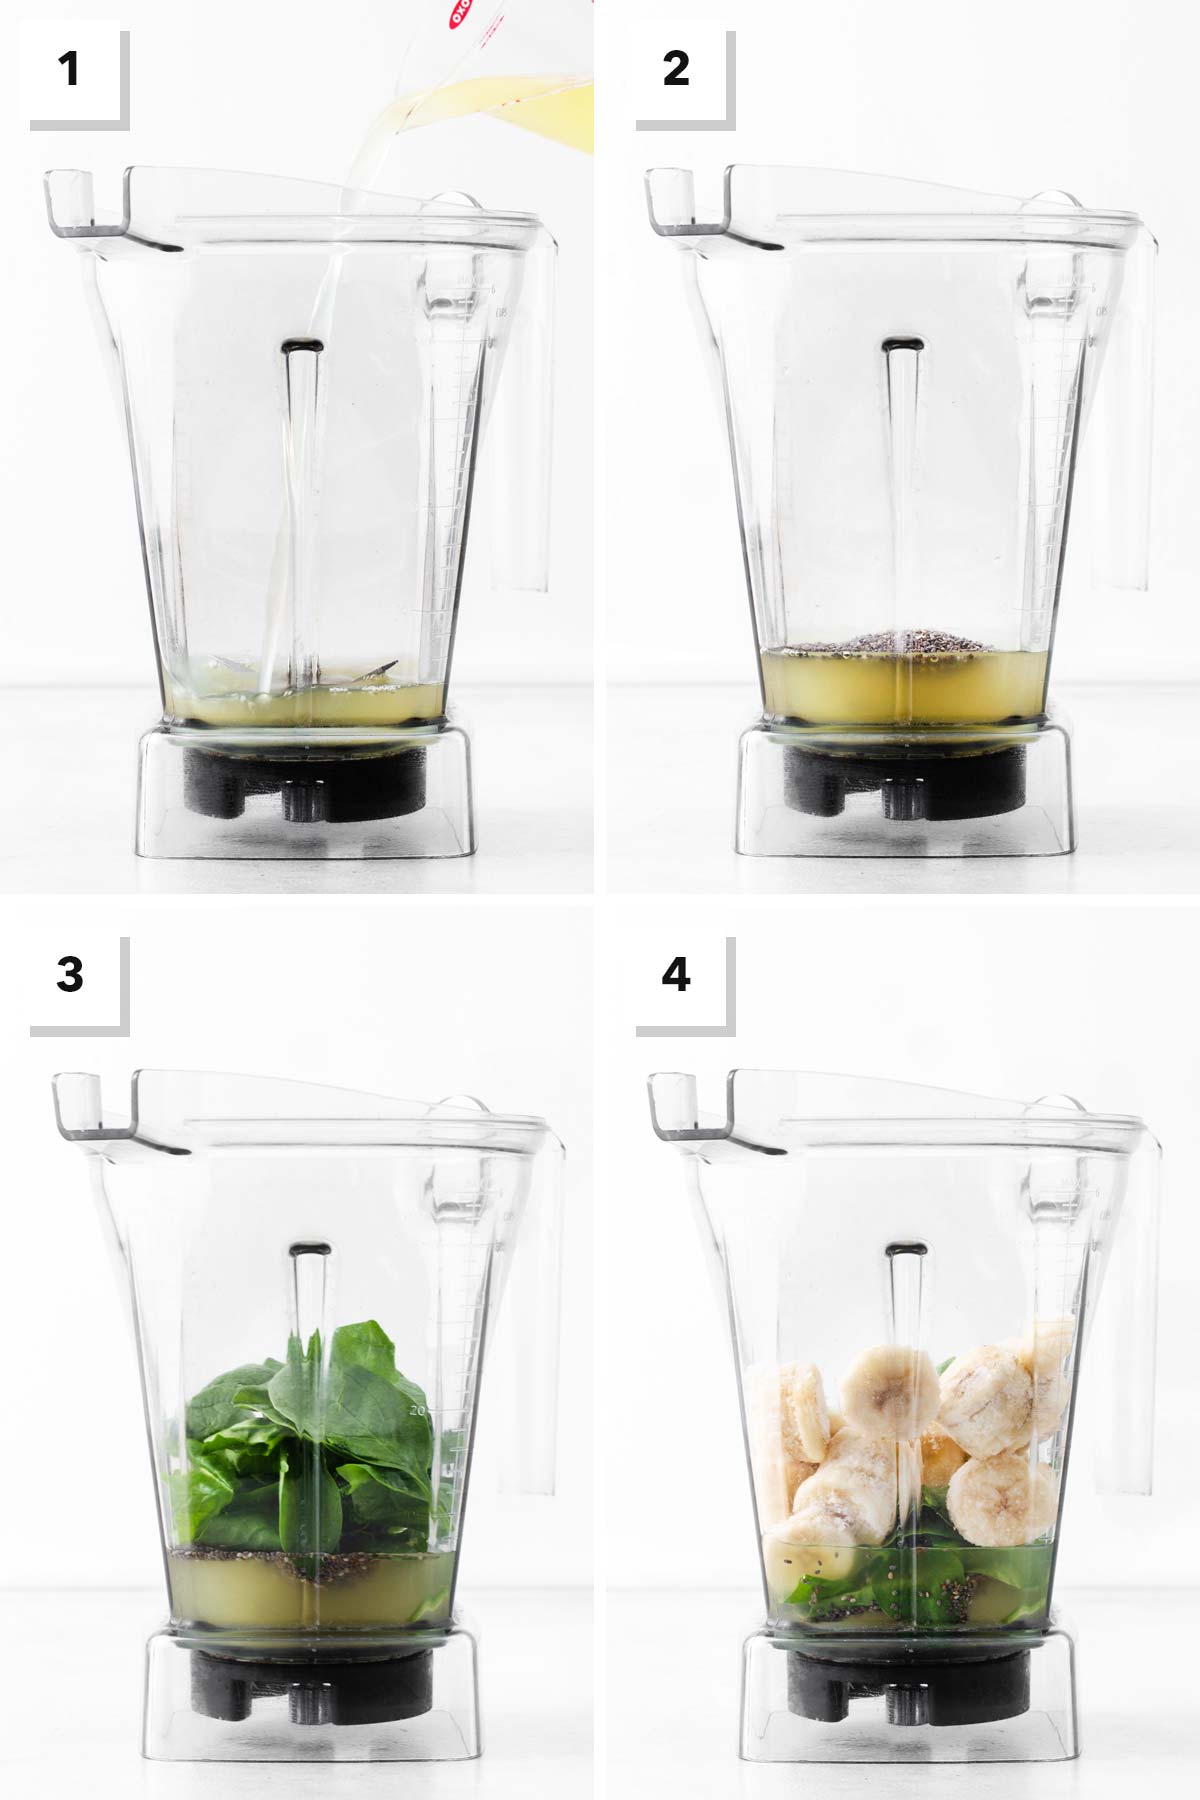 Steps for making a spinach smoothie.